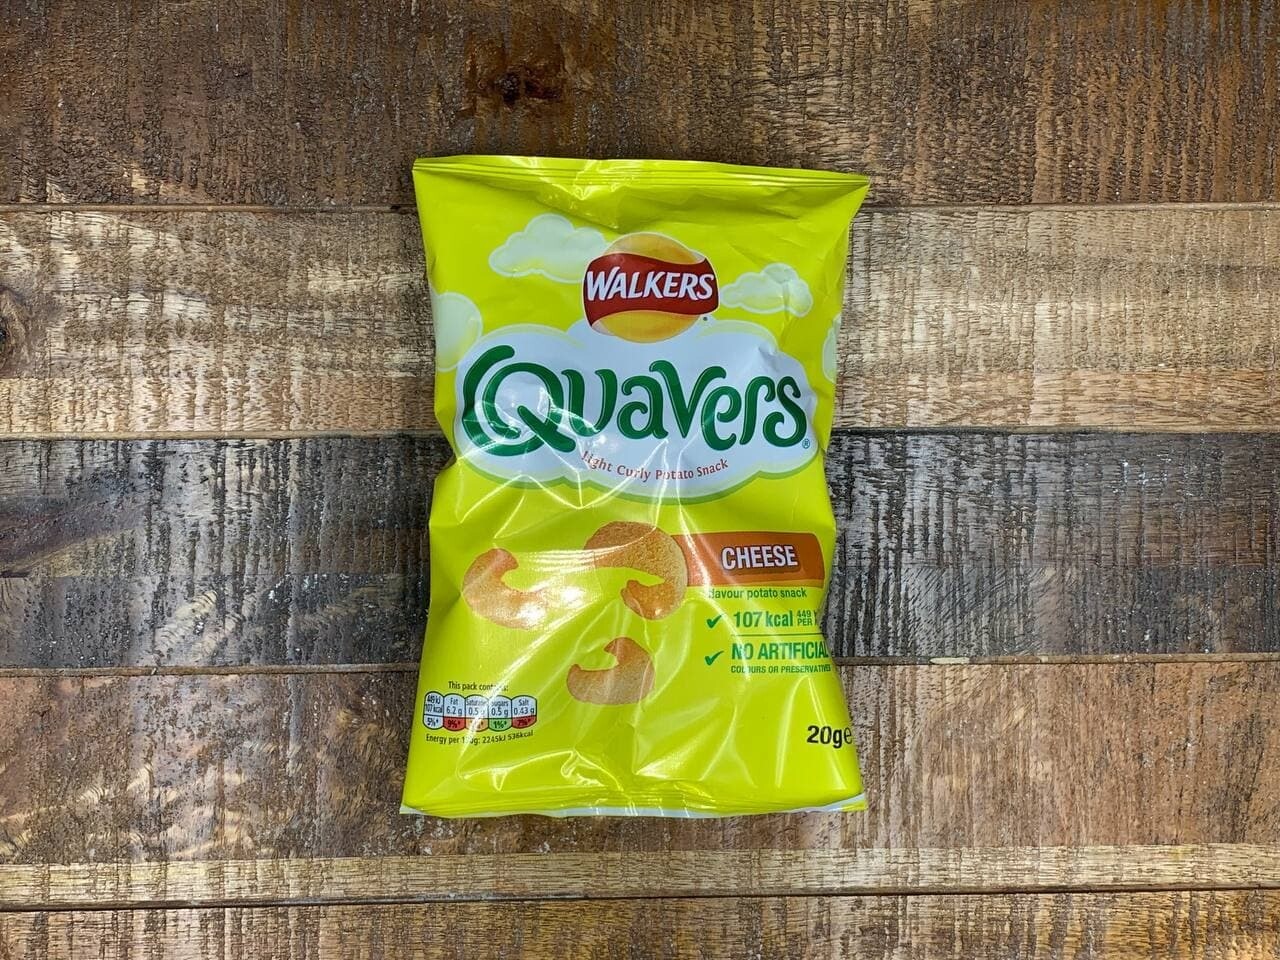 Walkers Quavers Cheese 20g